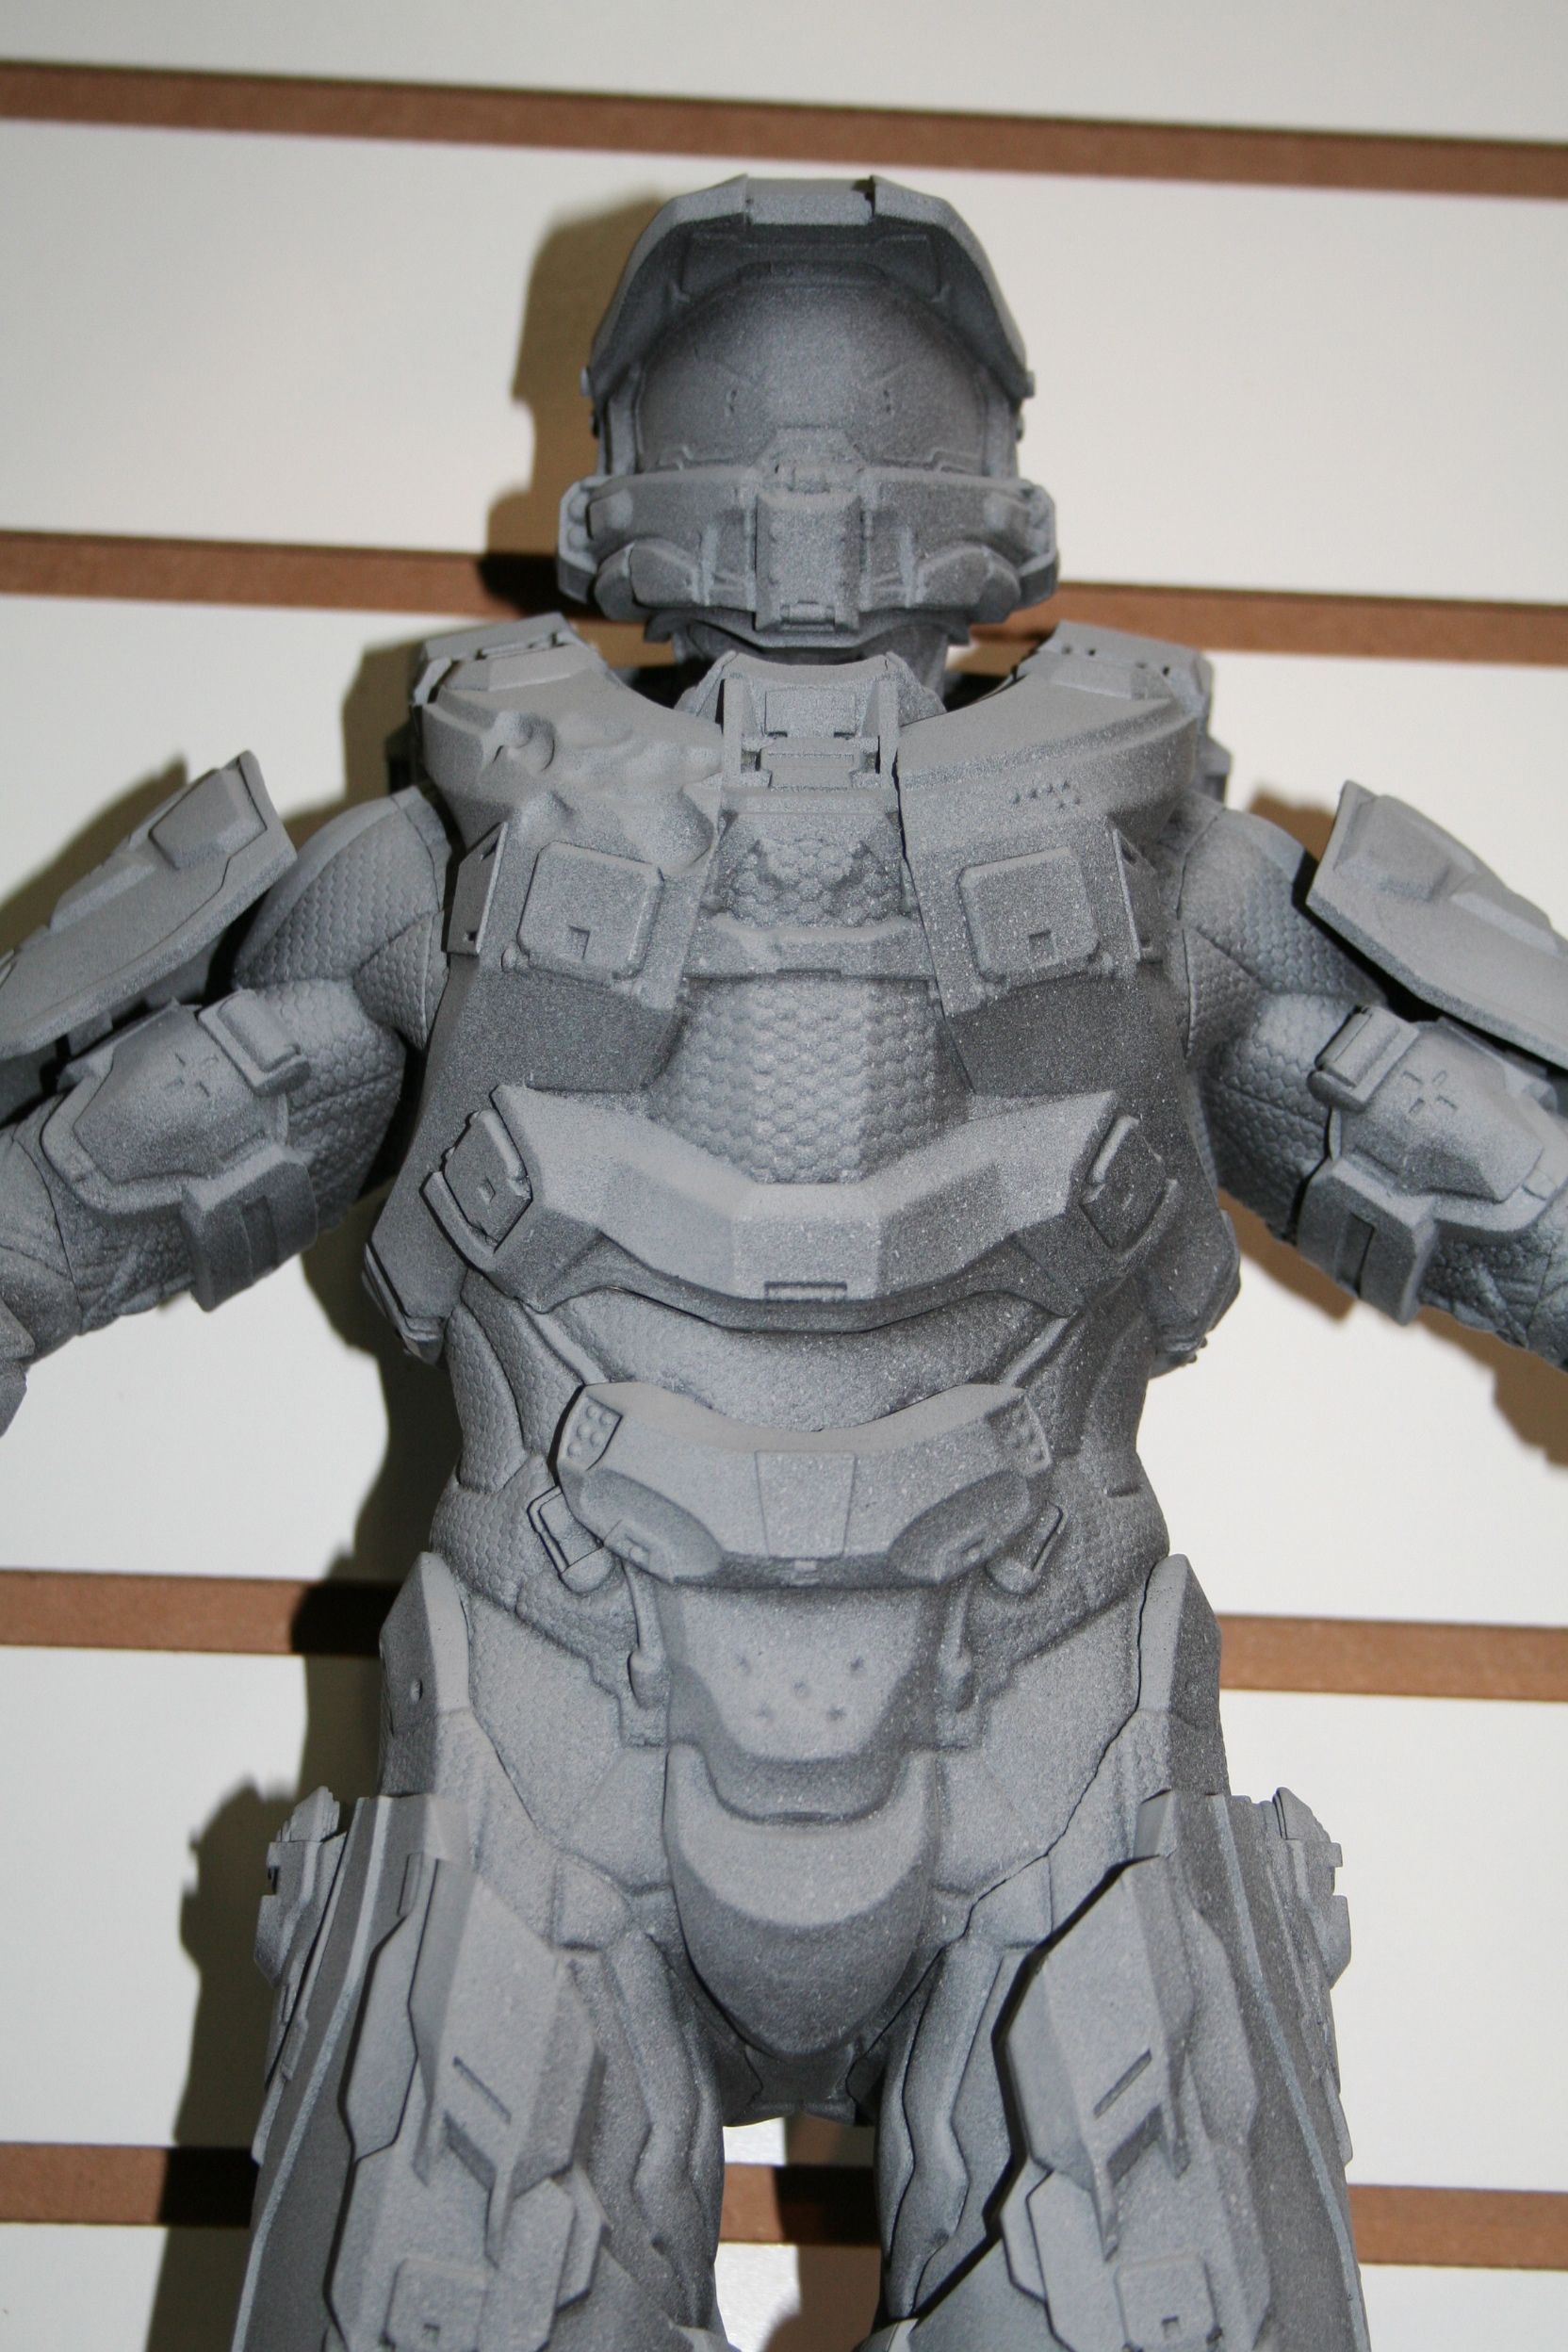 Pictures of the NECA Toys/Action Figures for DIVERGENT, PACIFIC RIM ...